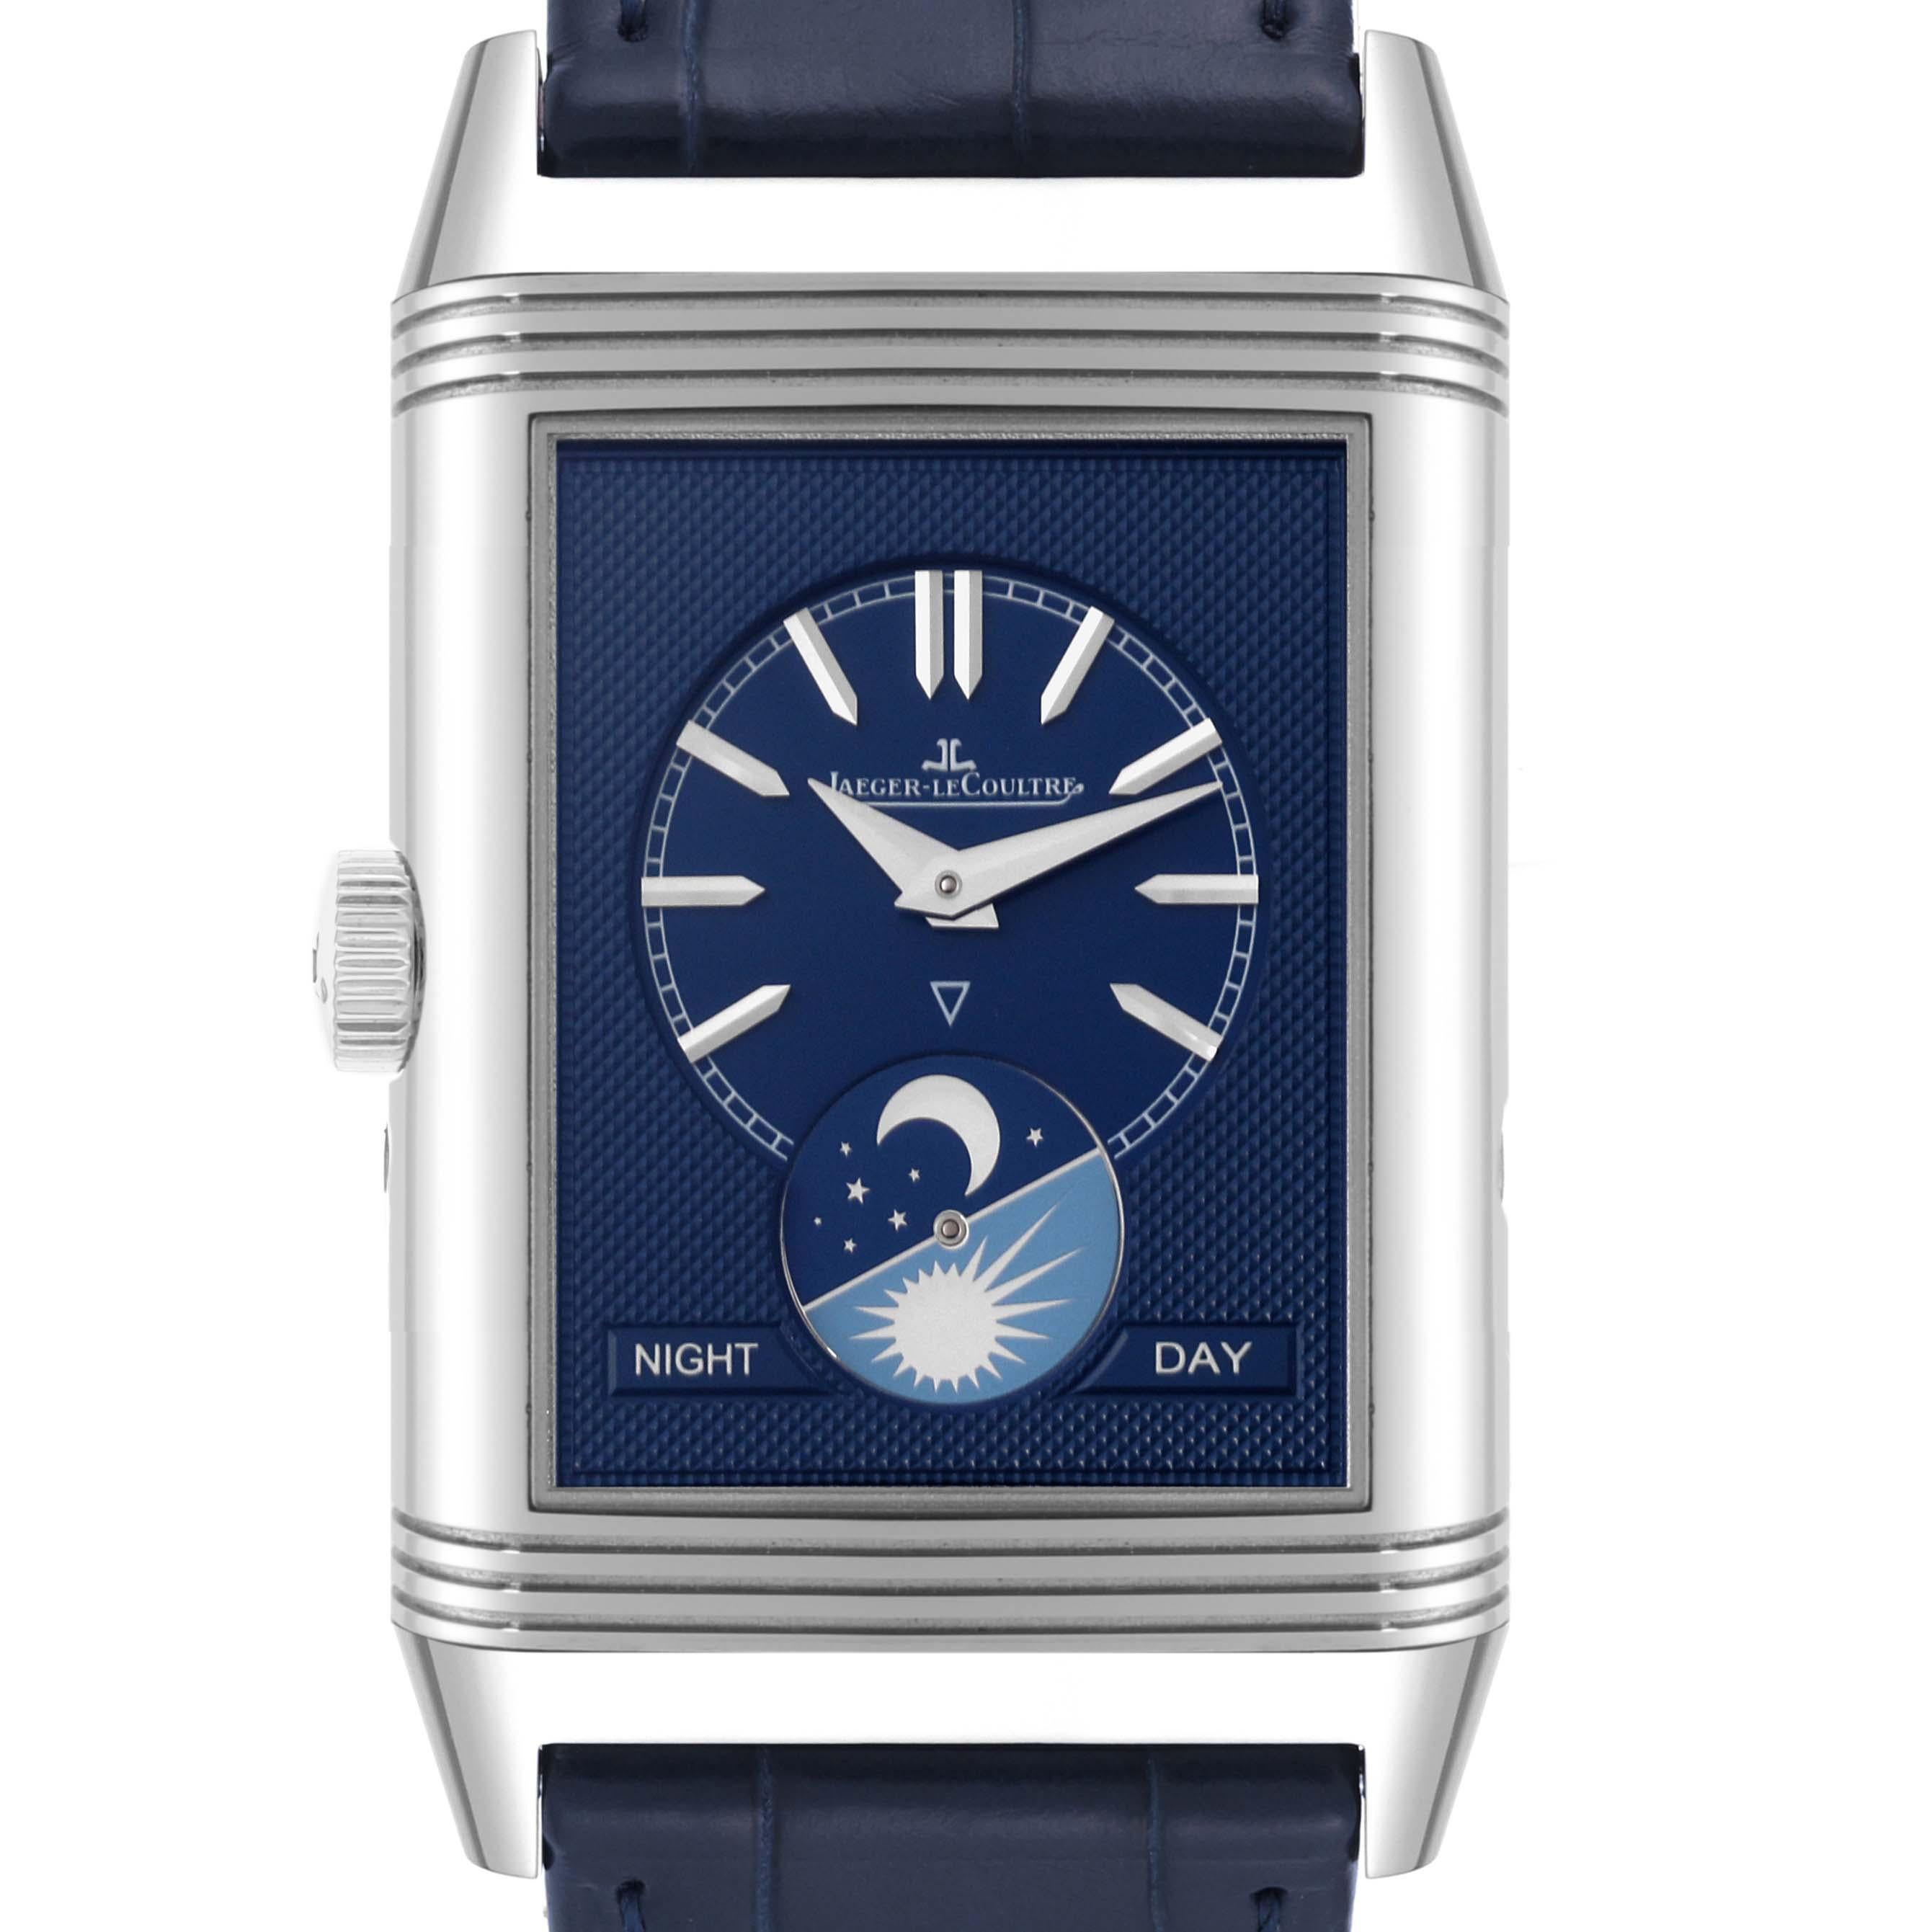 Jaeger LeCoultre Reverso Tribute Duoface Steel Mens Watch 216.8.D3 Q3958420 Box Card. Manual-winding movement. Rhodium plated with engine turned embellishment, 19 jewels, 223 components, a single barrel, blued screws, shock absorber system,